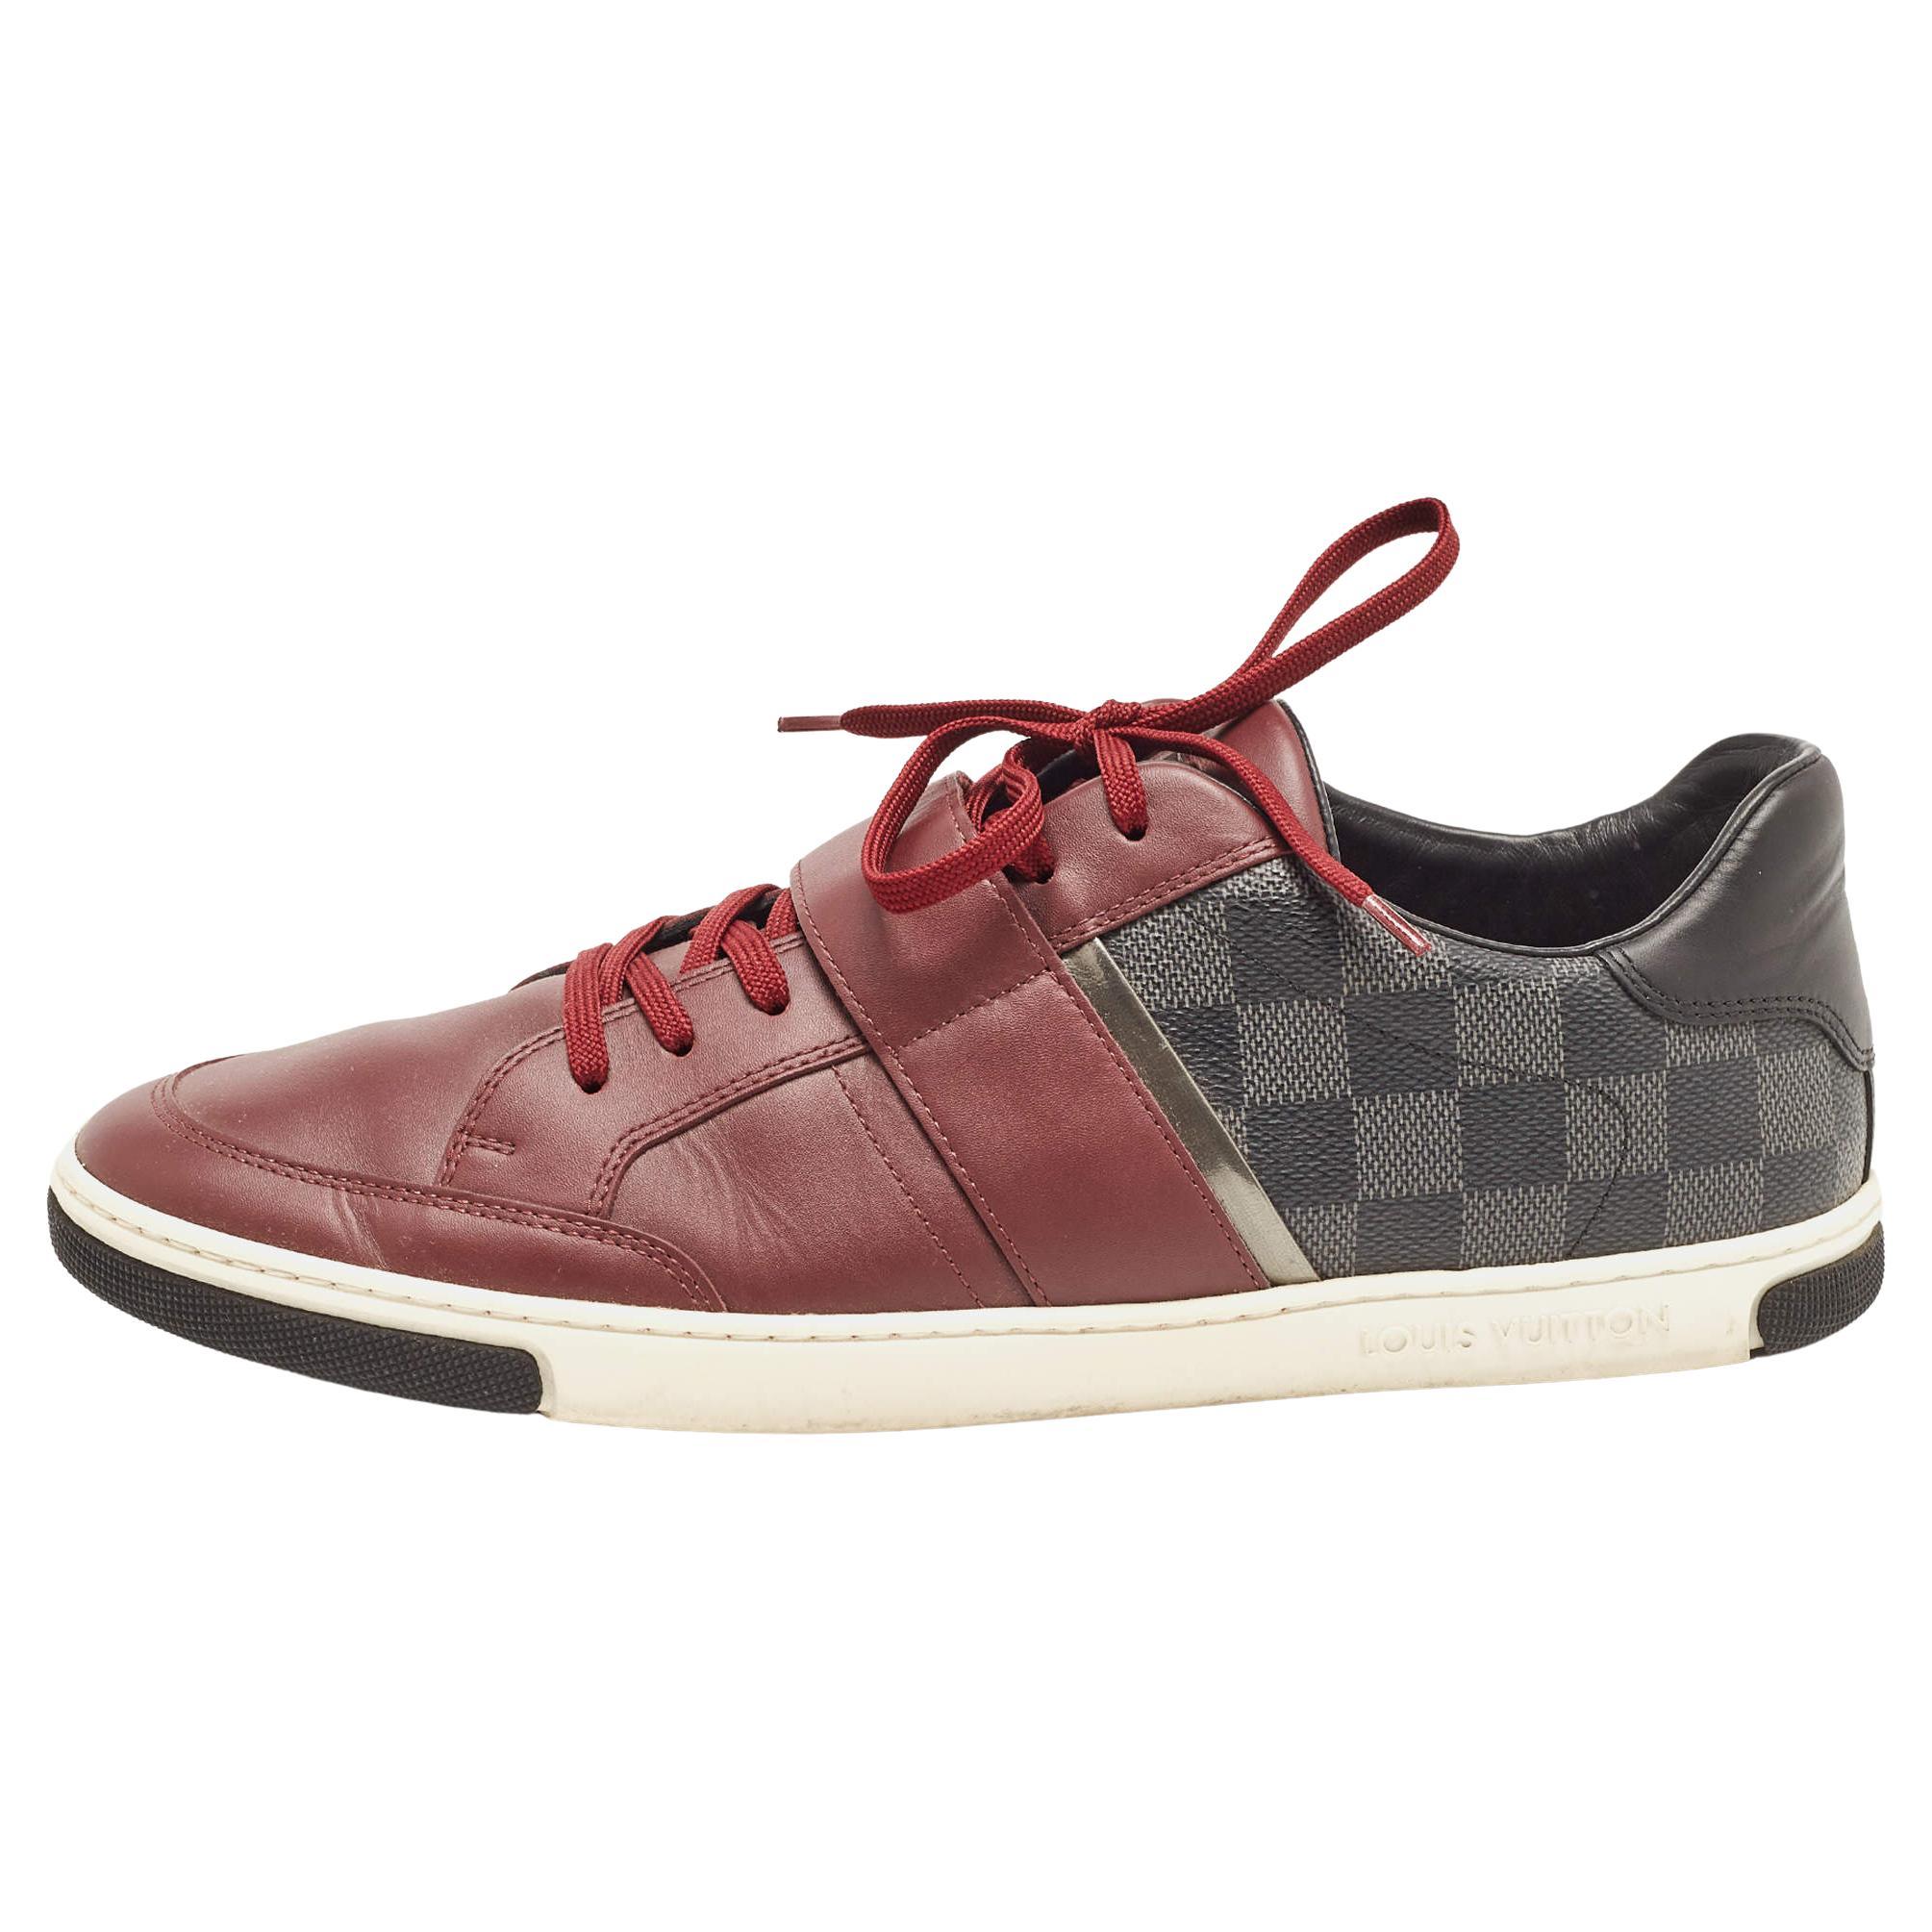 Louis Vuitton Two Tone Damier Ebene Fabric and Leather Sneakers Size 43 For Sale